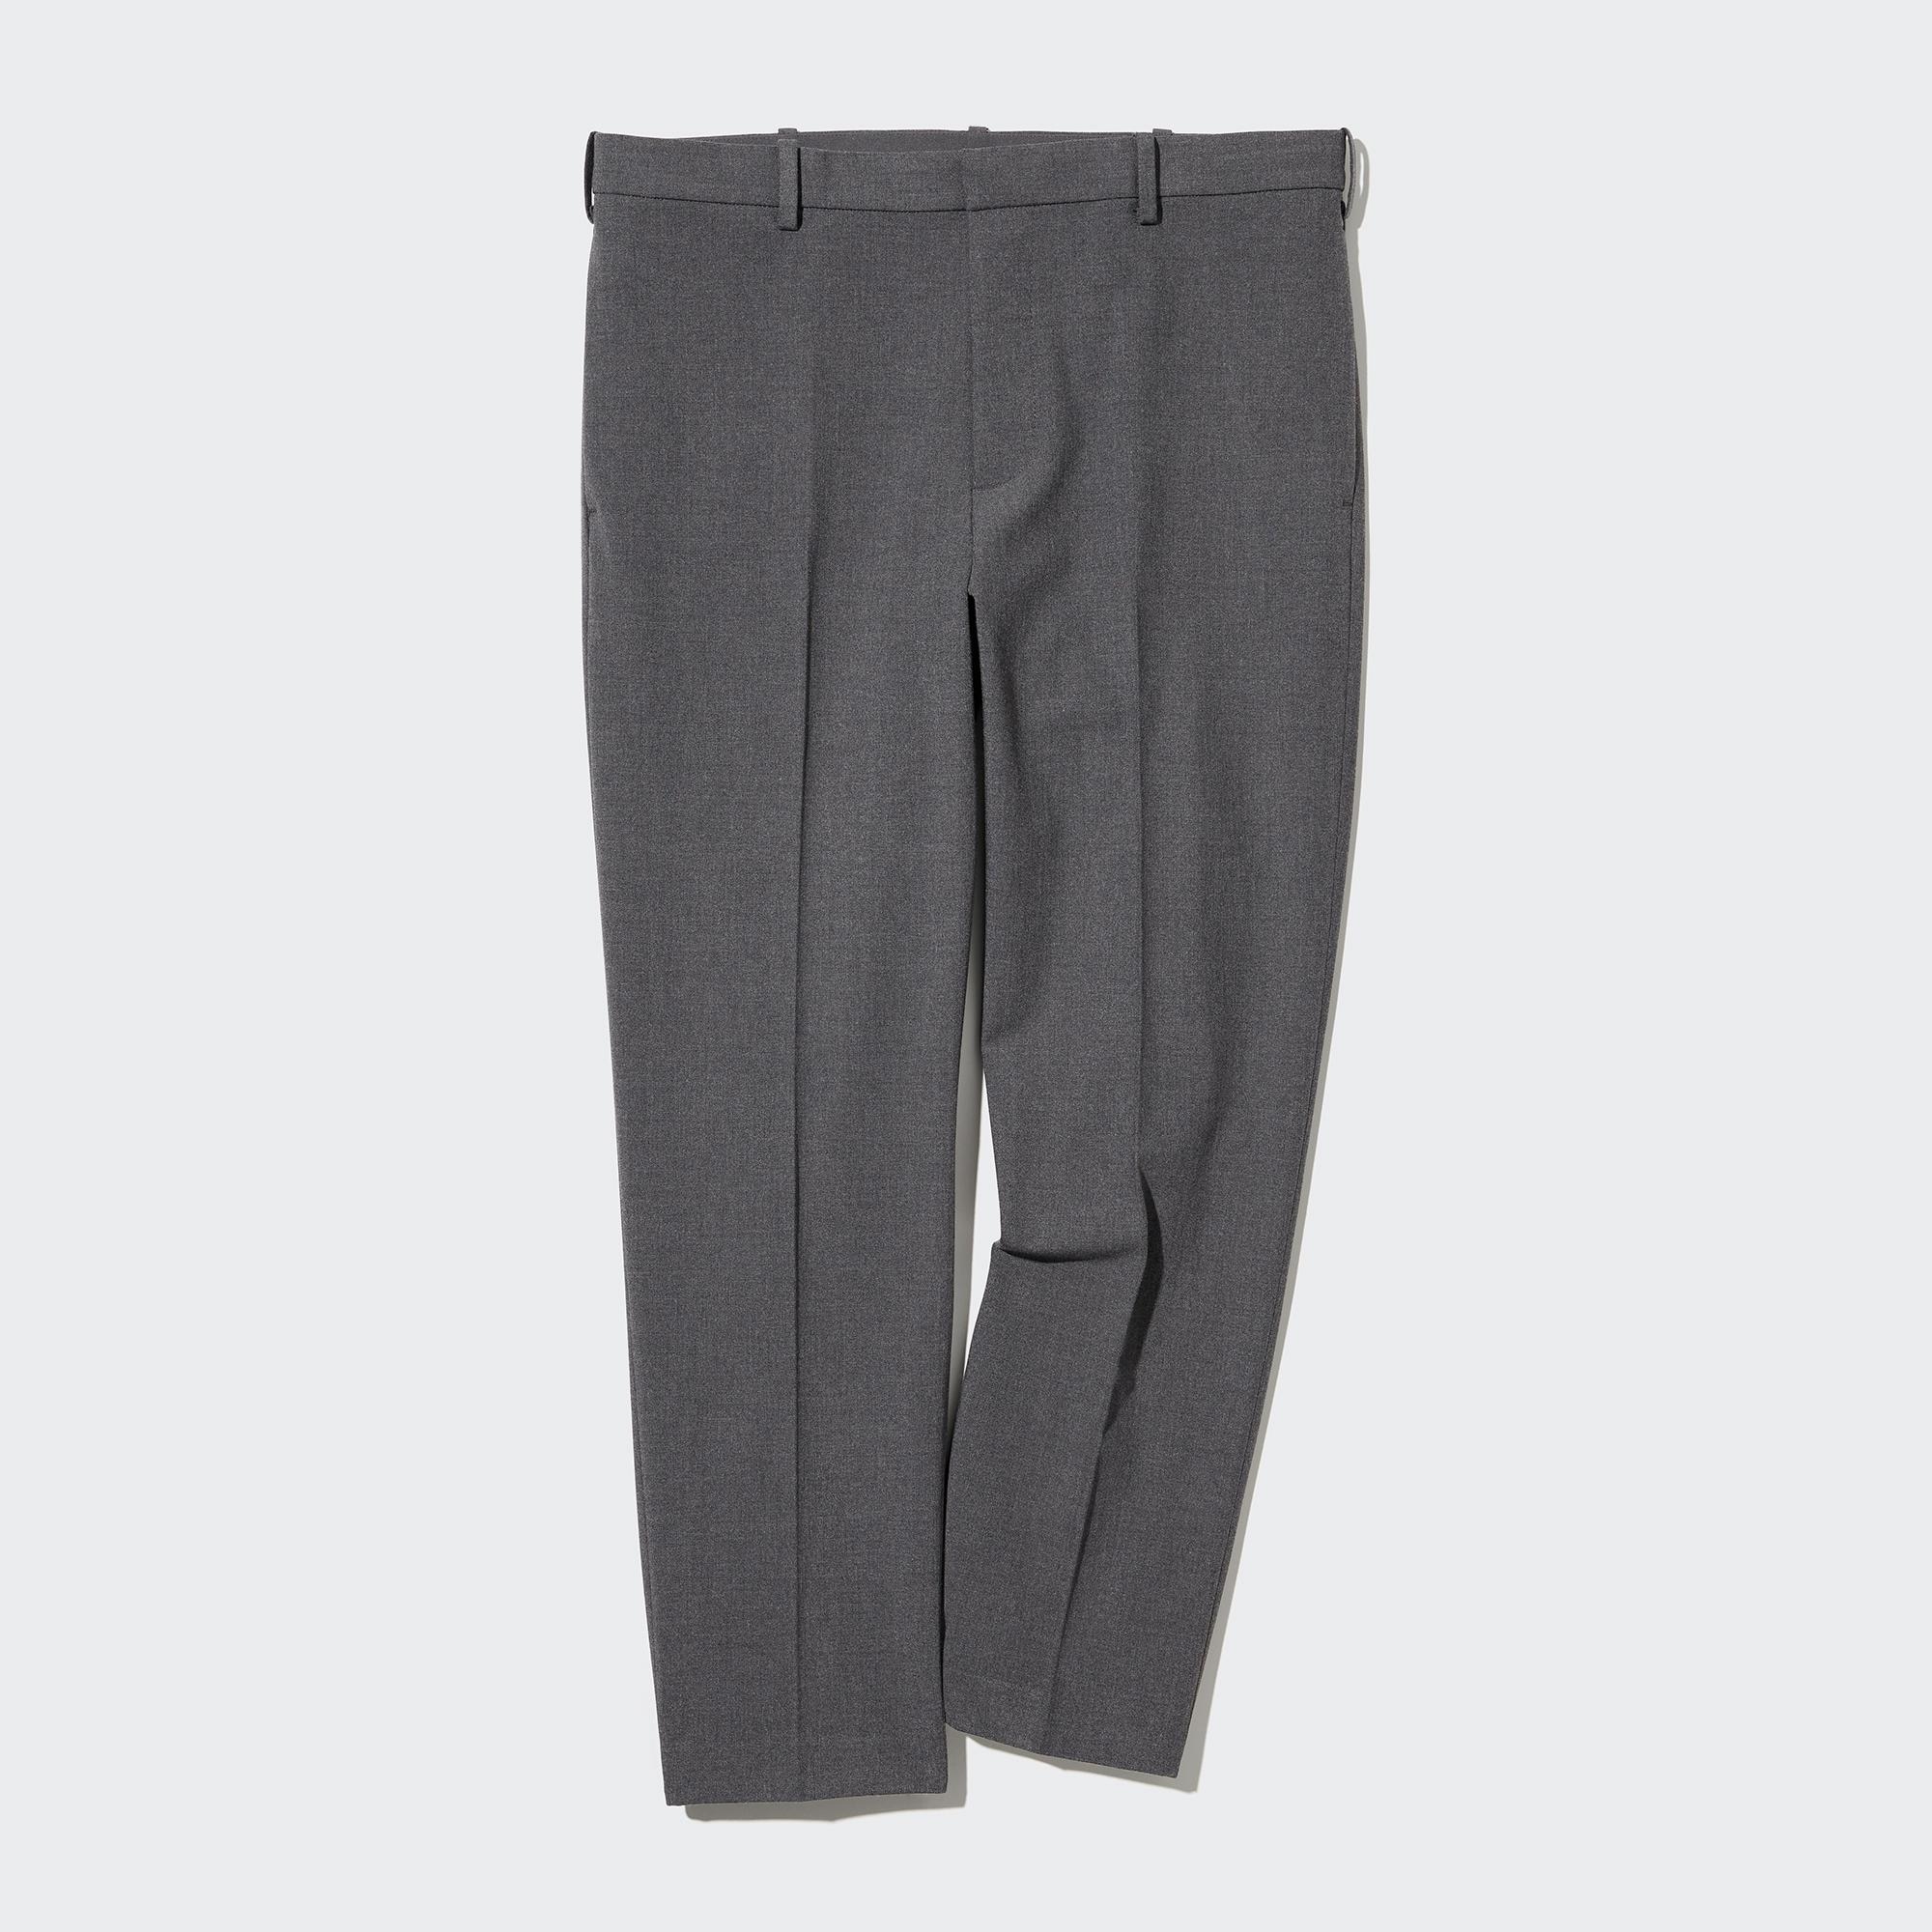 Anyone bought Smart Ankle Pants from Uniqlo? I have a question : r